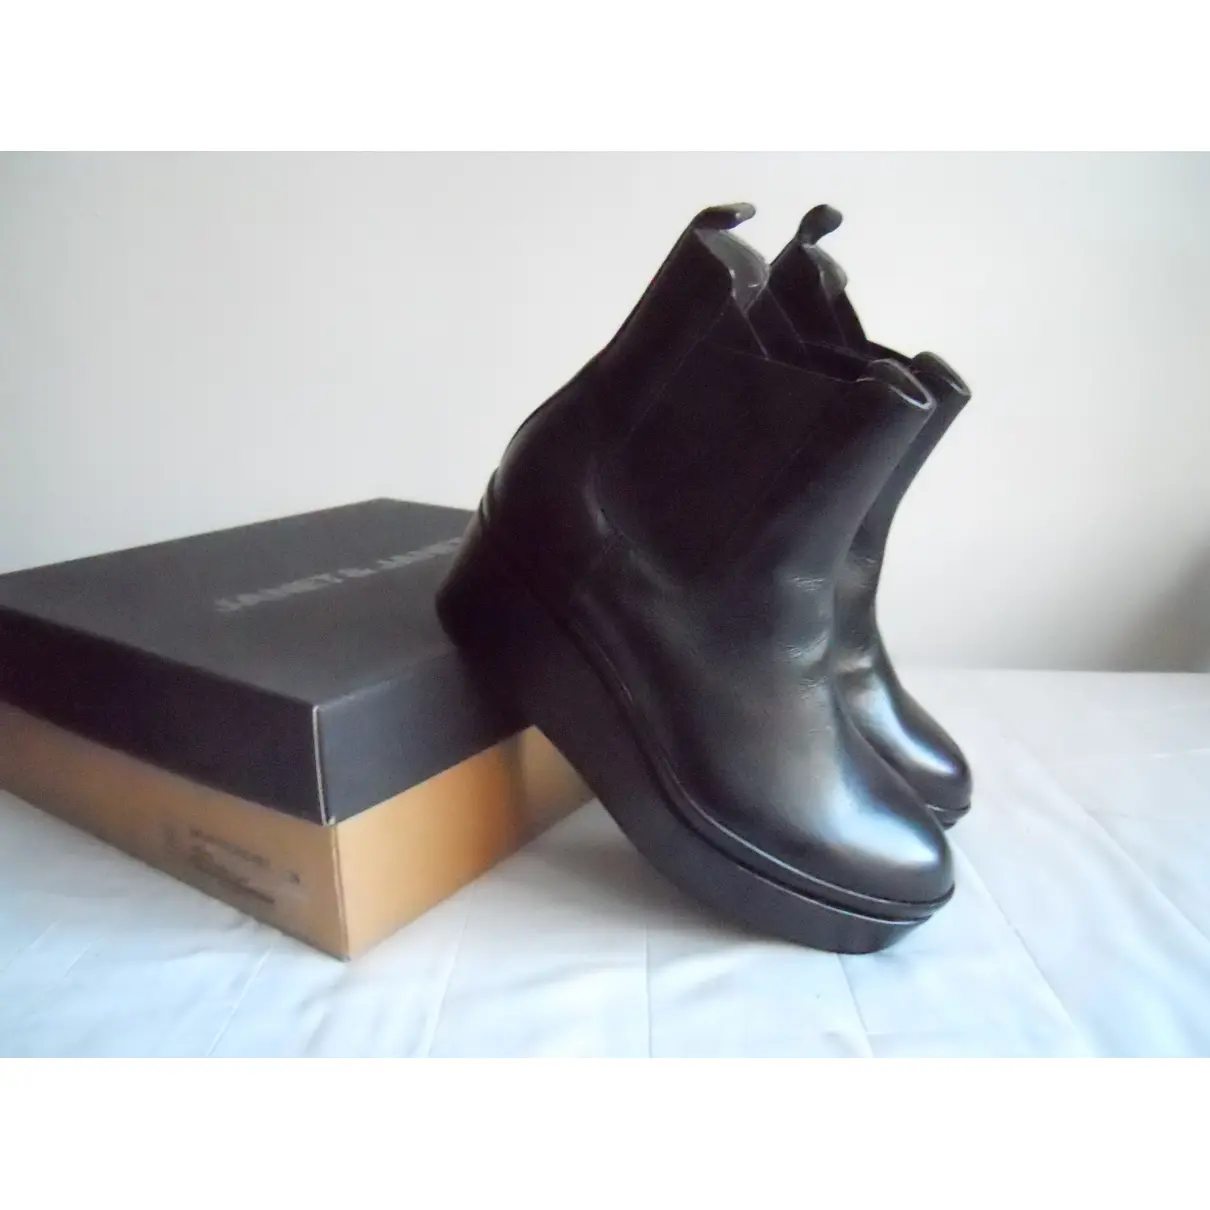 Leather ankle boots Janet & Janet